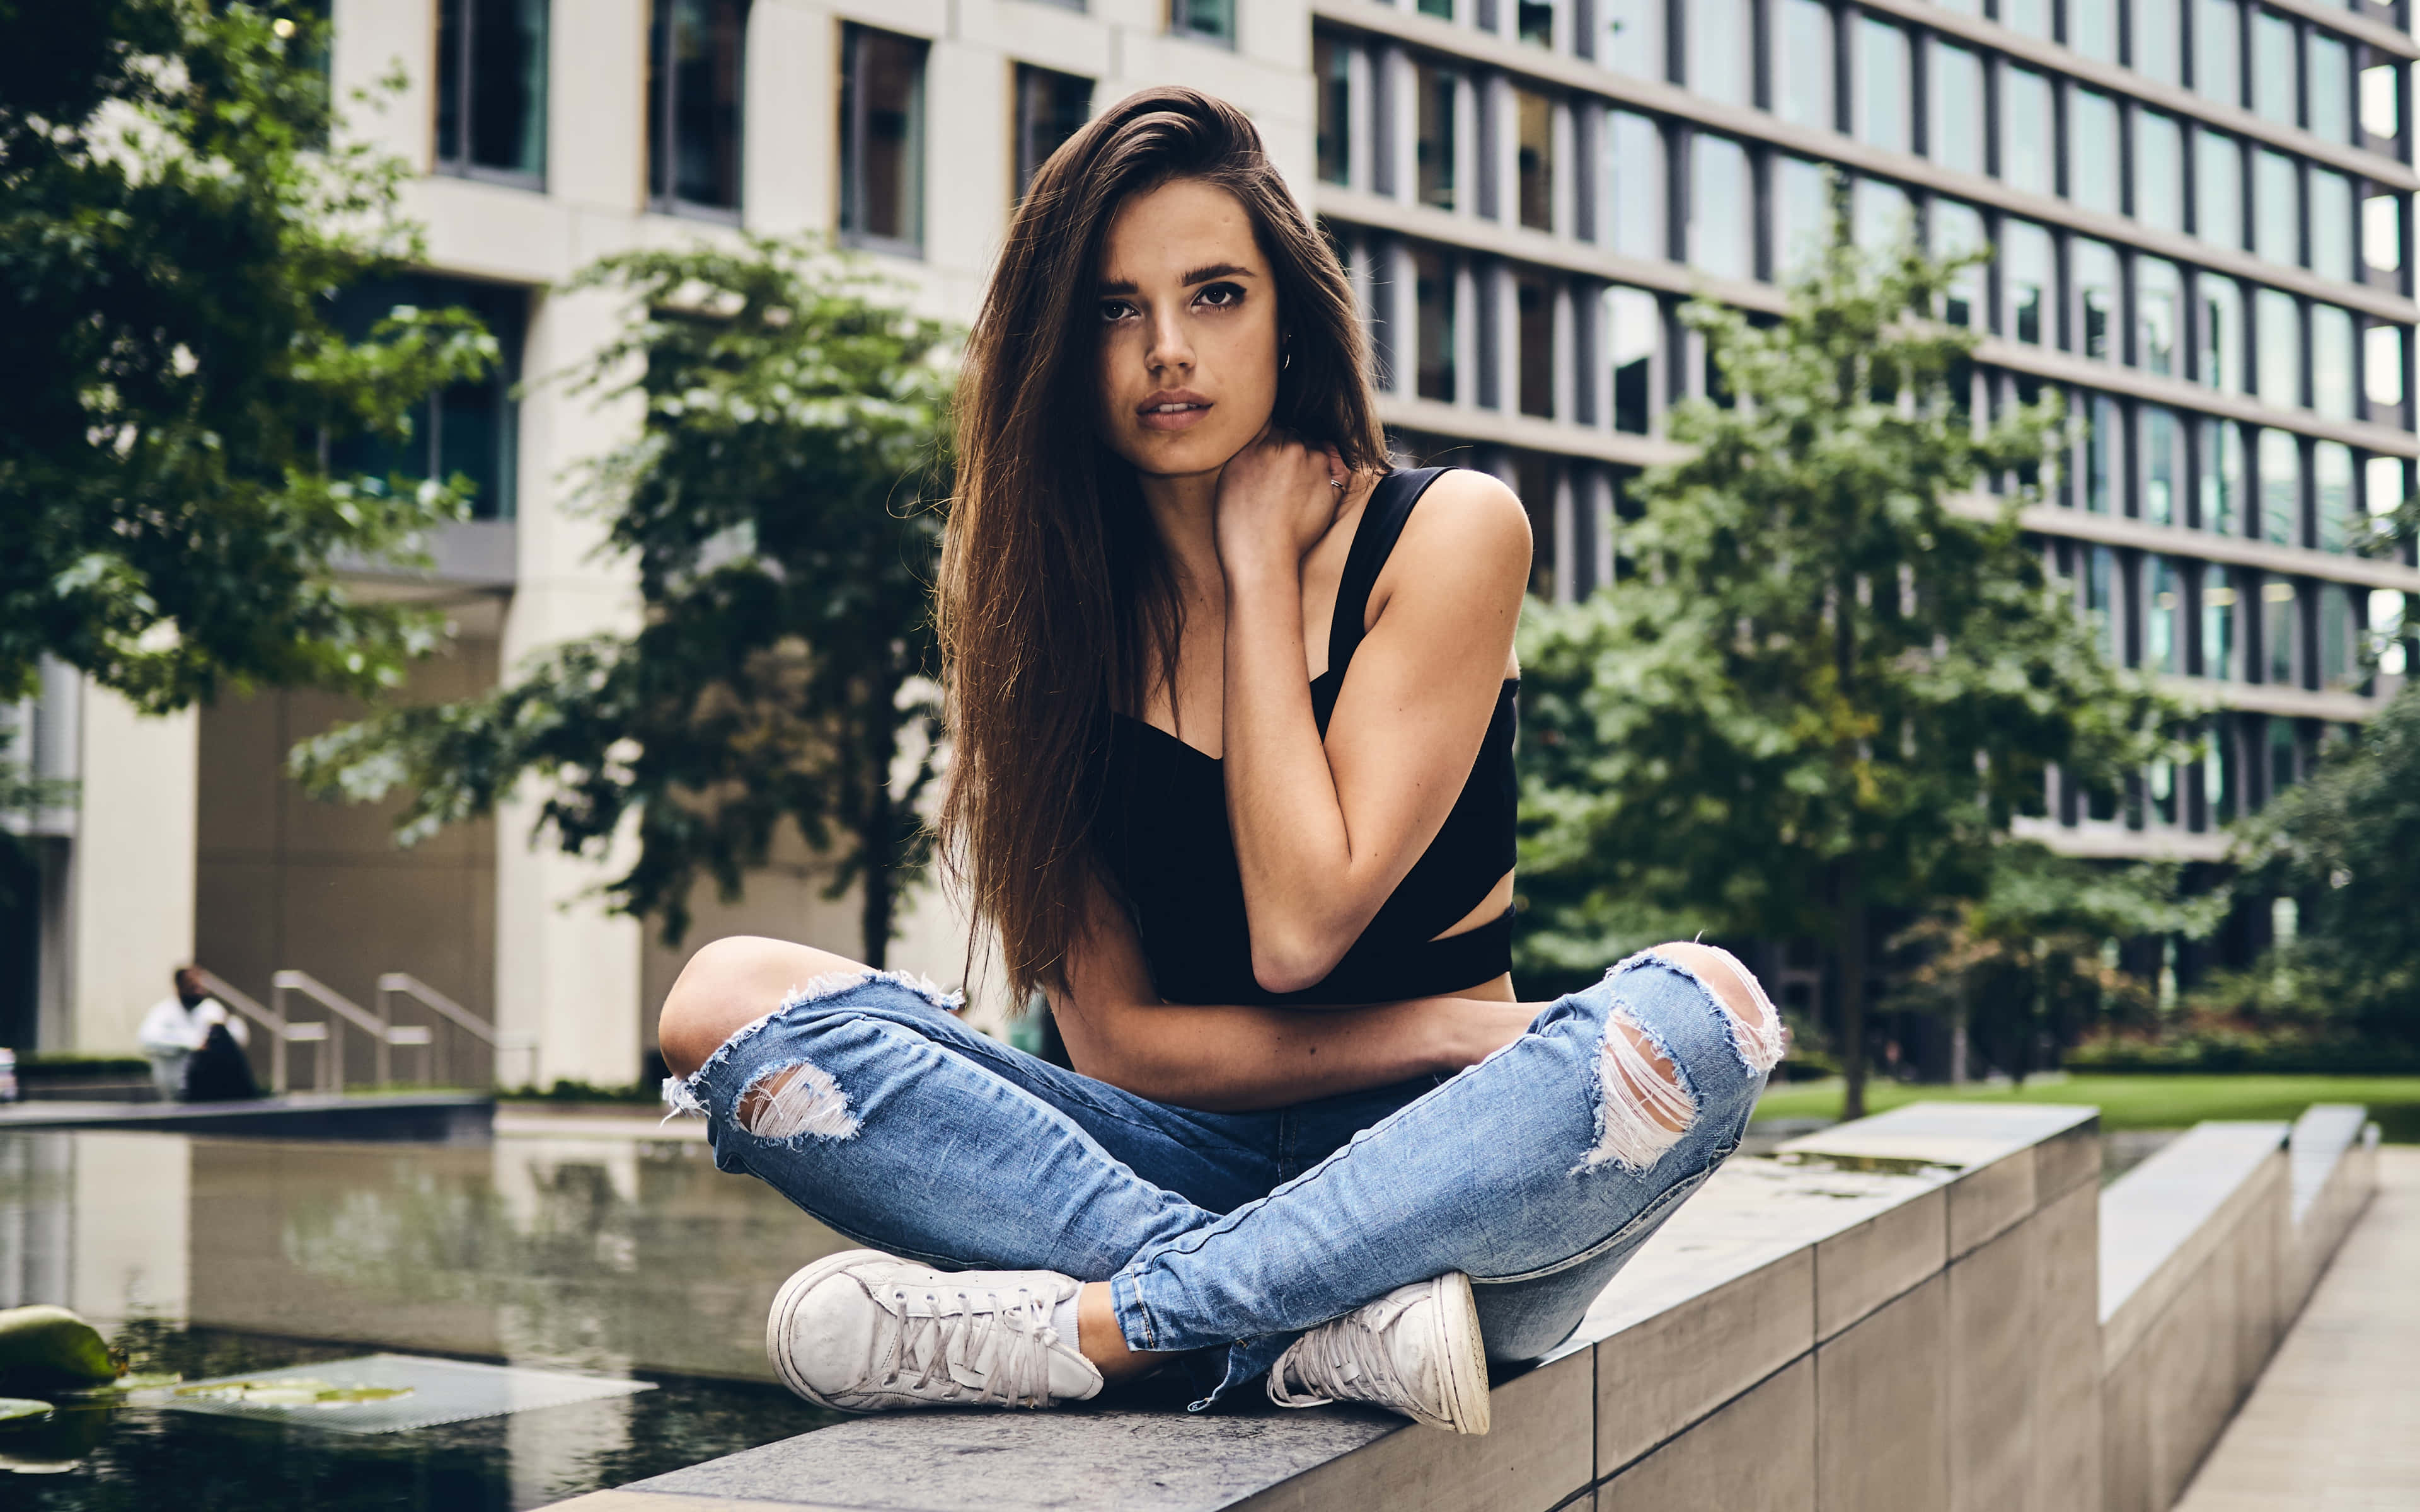 Girl In Jeans Pictures